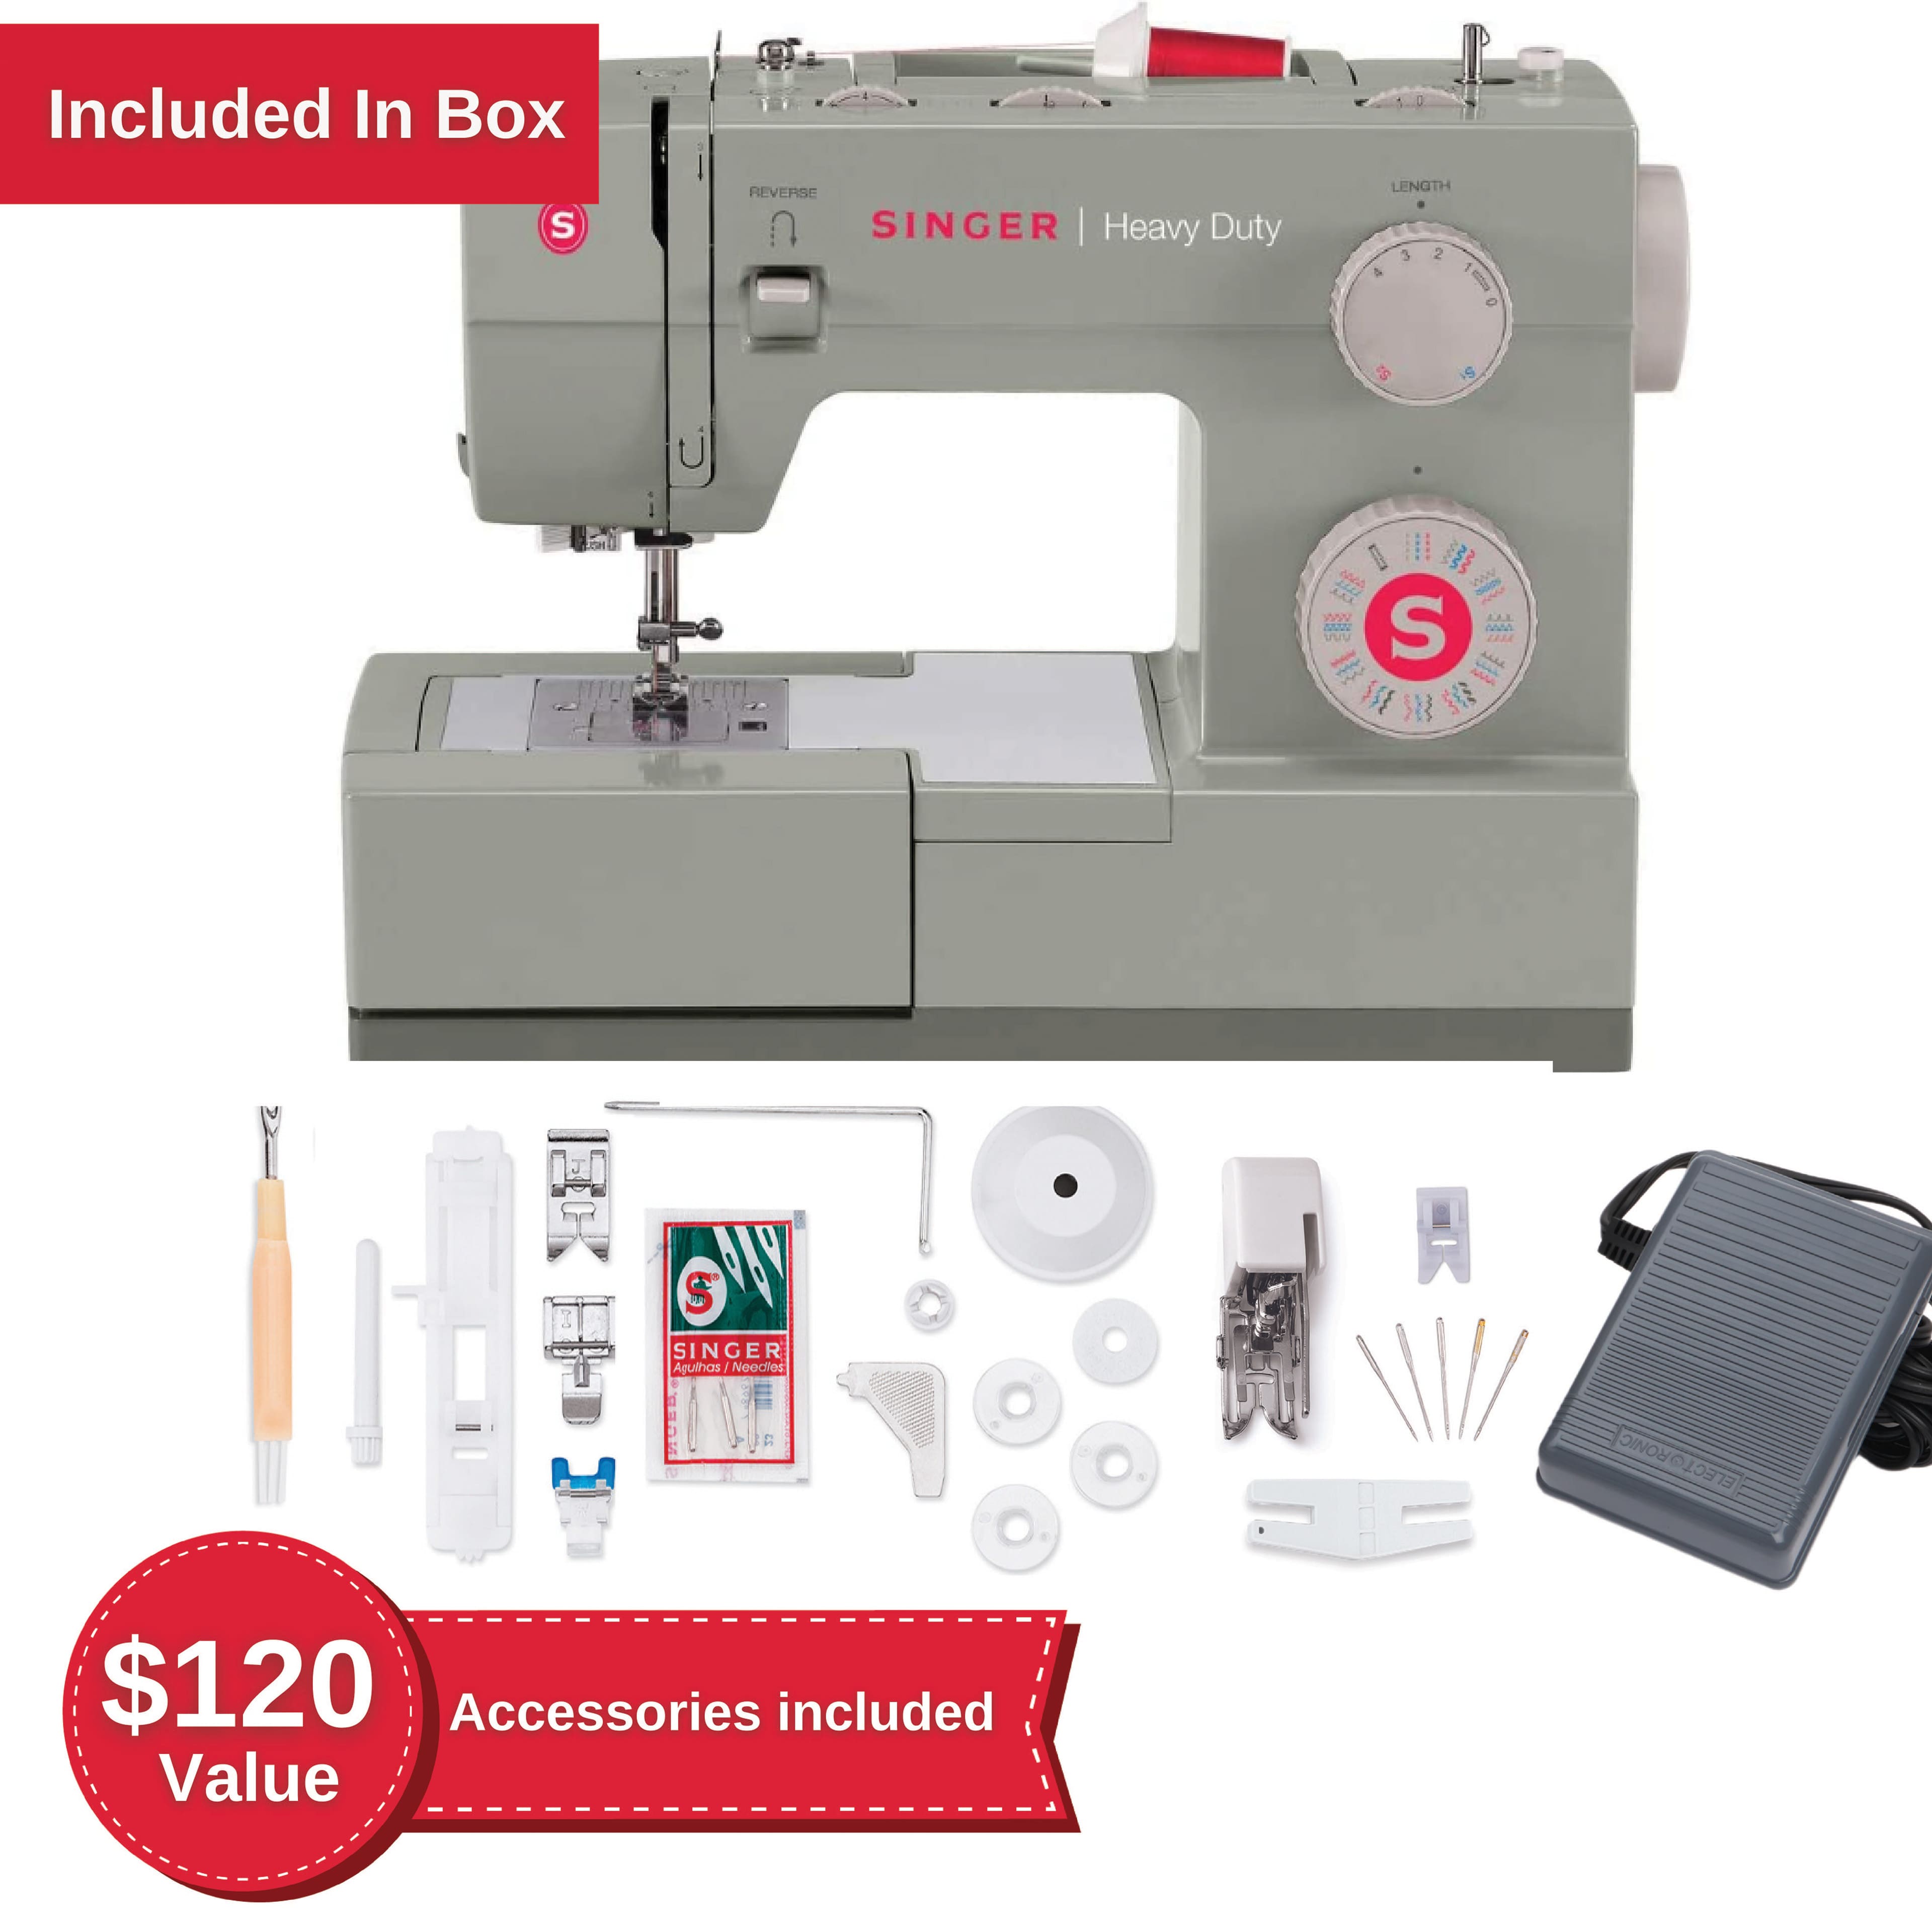 Household sewing machine，Sewing 230072112 Singer 4452 Heavy Duty